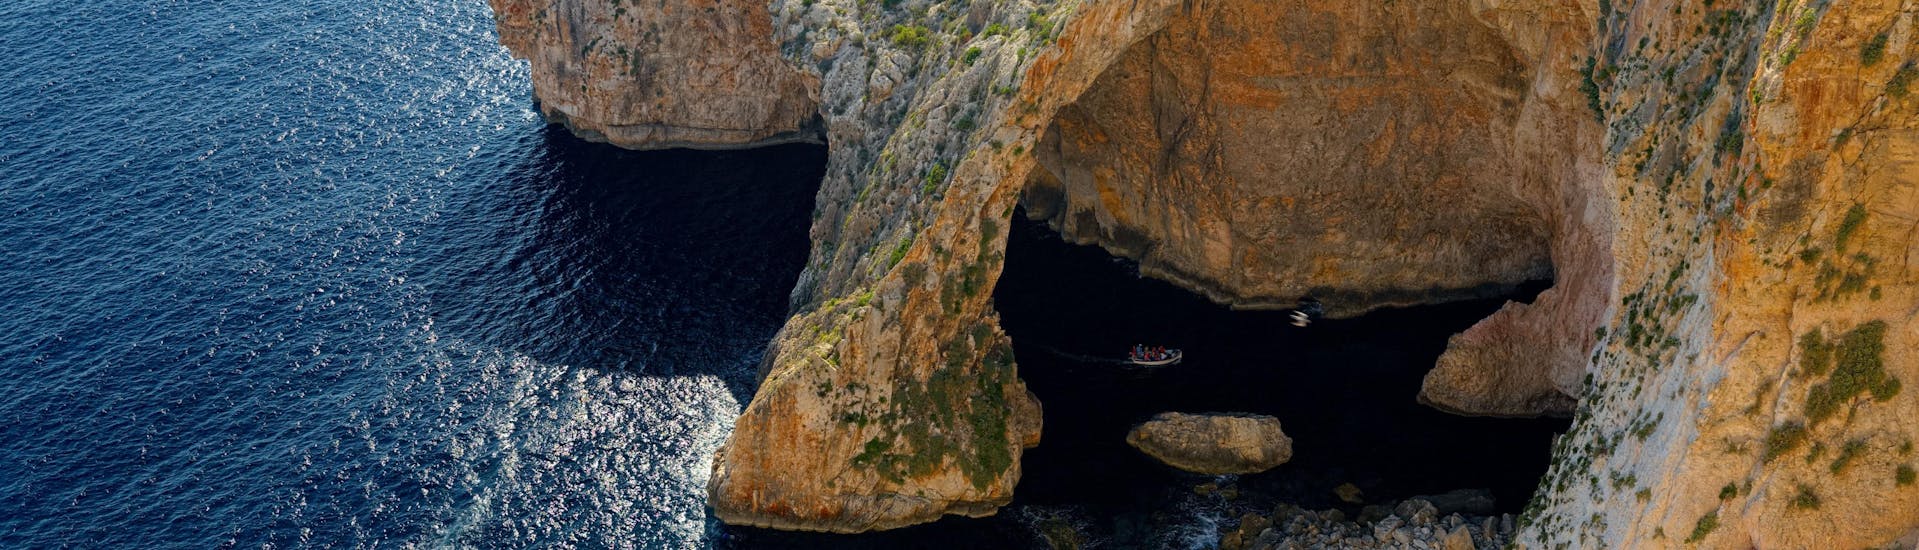 View of the Blue Grotto, in Gozo Malta, a popular destination for boat trips.